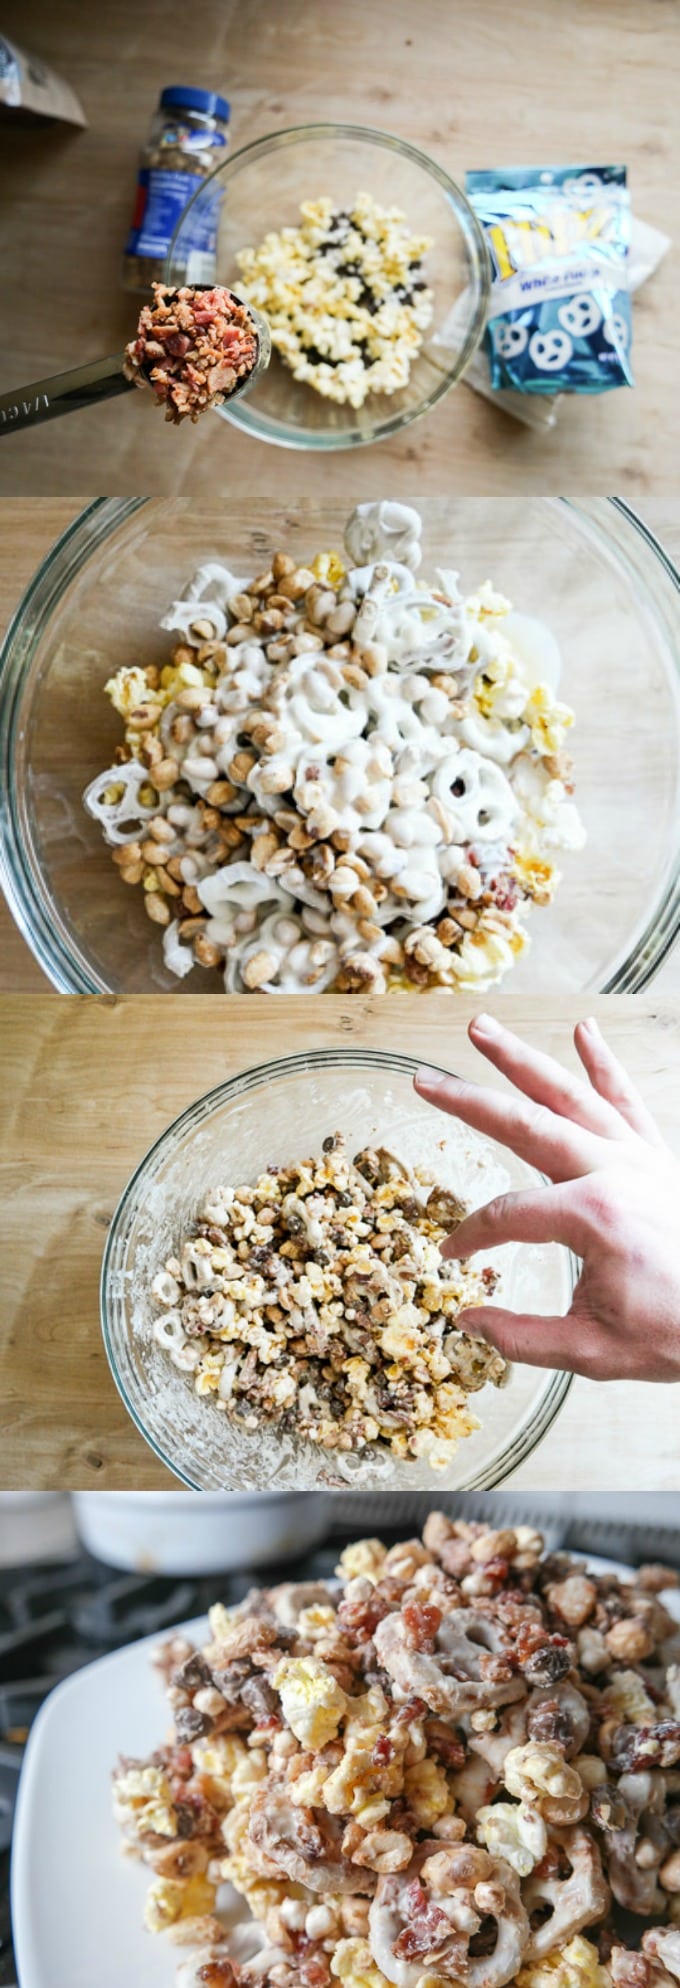 White chocolate bacon snack mix made with white chocolate-covered pretzels, diced bacon, semi-sweet chocolate chips, peanuts, mini marshmallows...this sweet and salty combo is a HUGE win in my house!